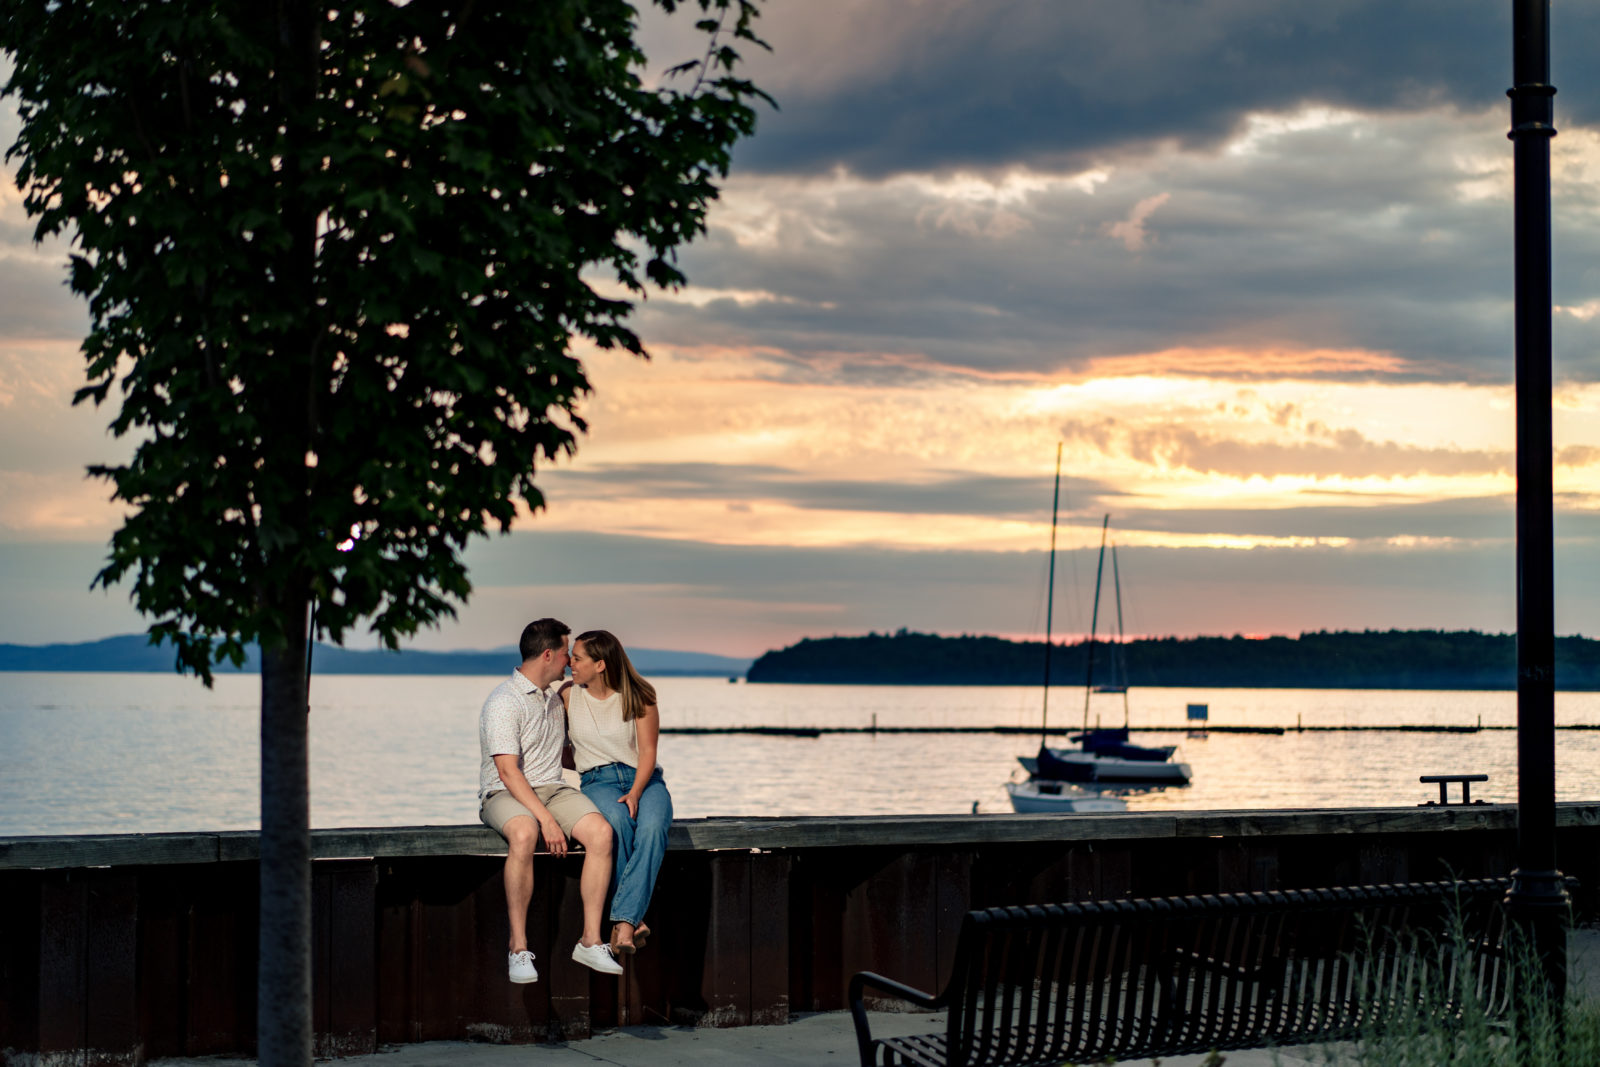 burlington vermont engagement session at sunset on lake champlain by andy madea